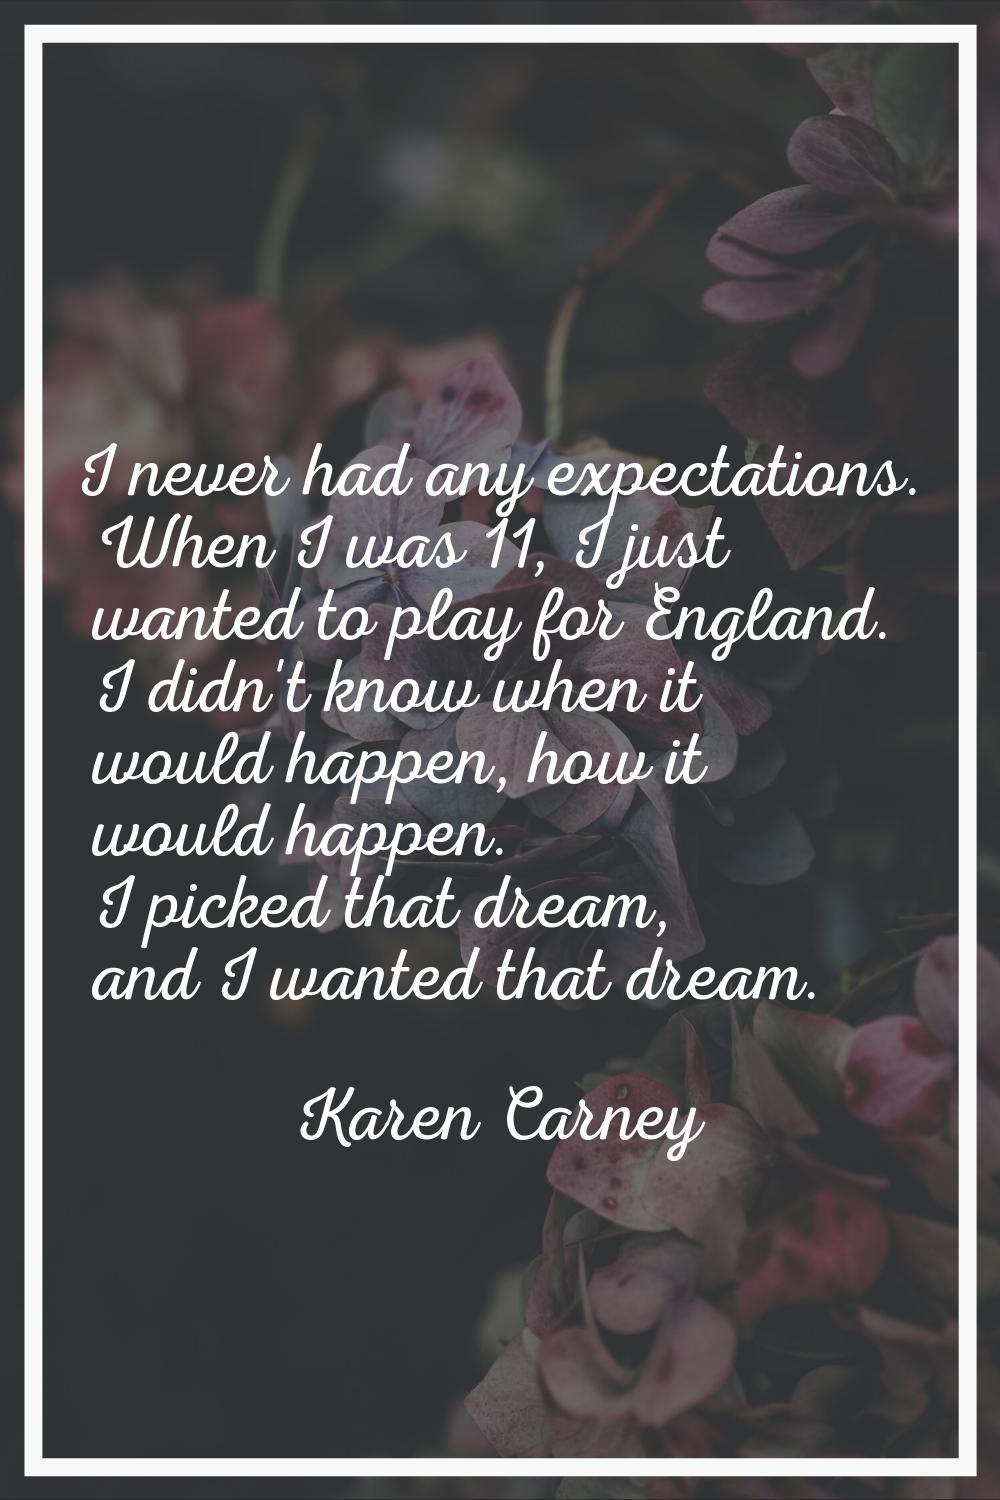 I never had any expectations. When I was 11, I just wanted to play for England. I didn't know when 